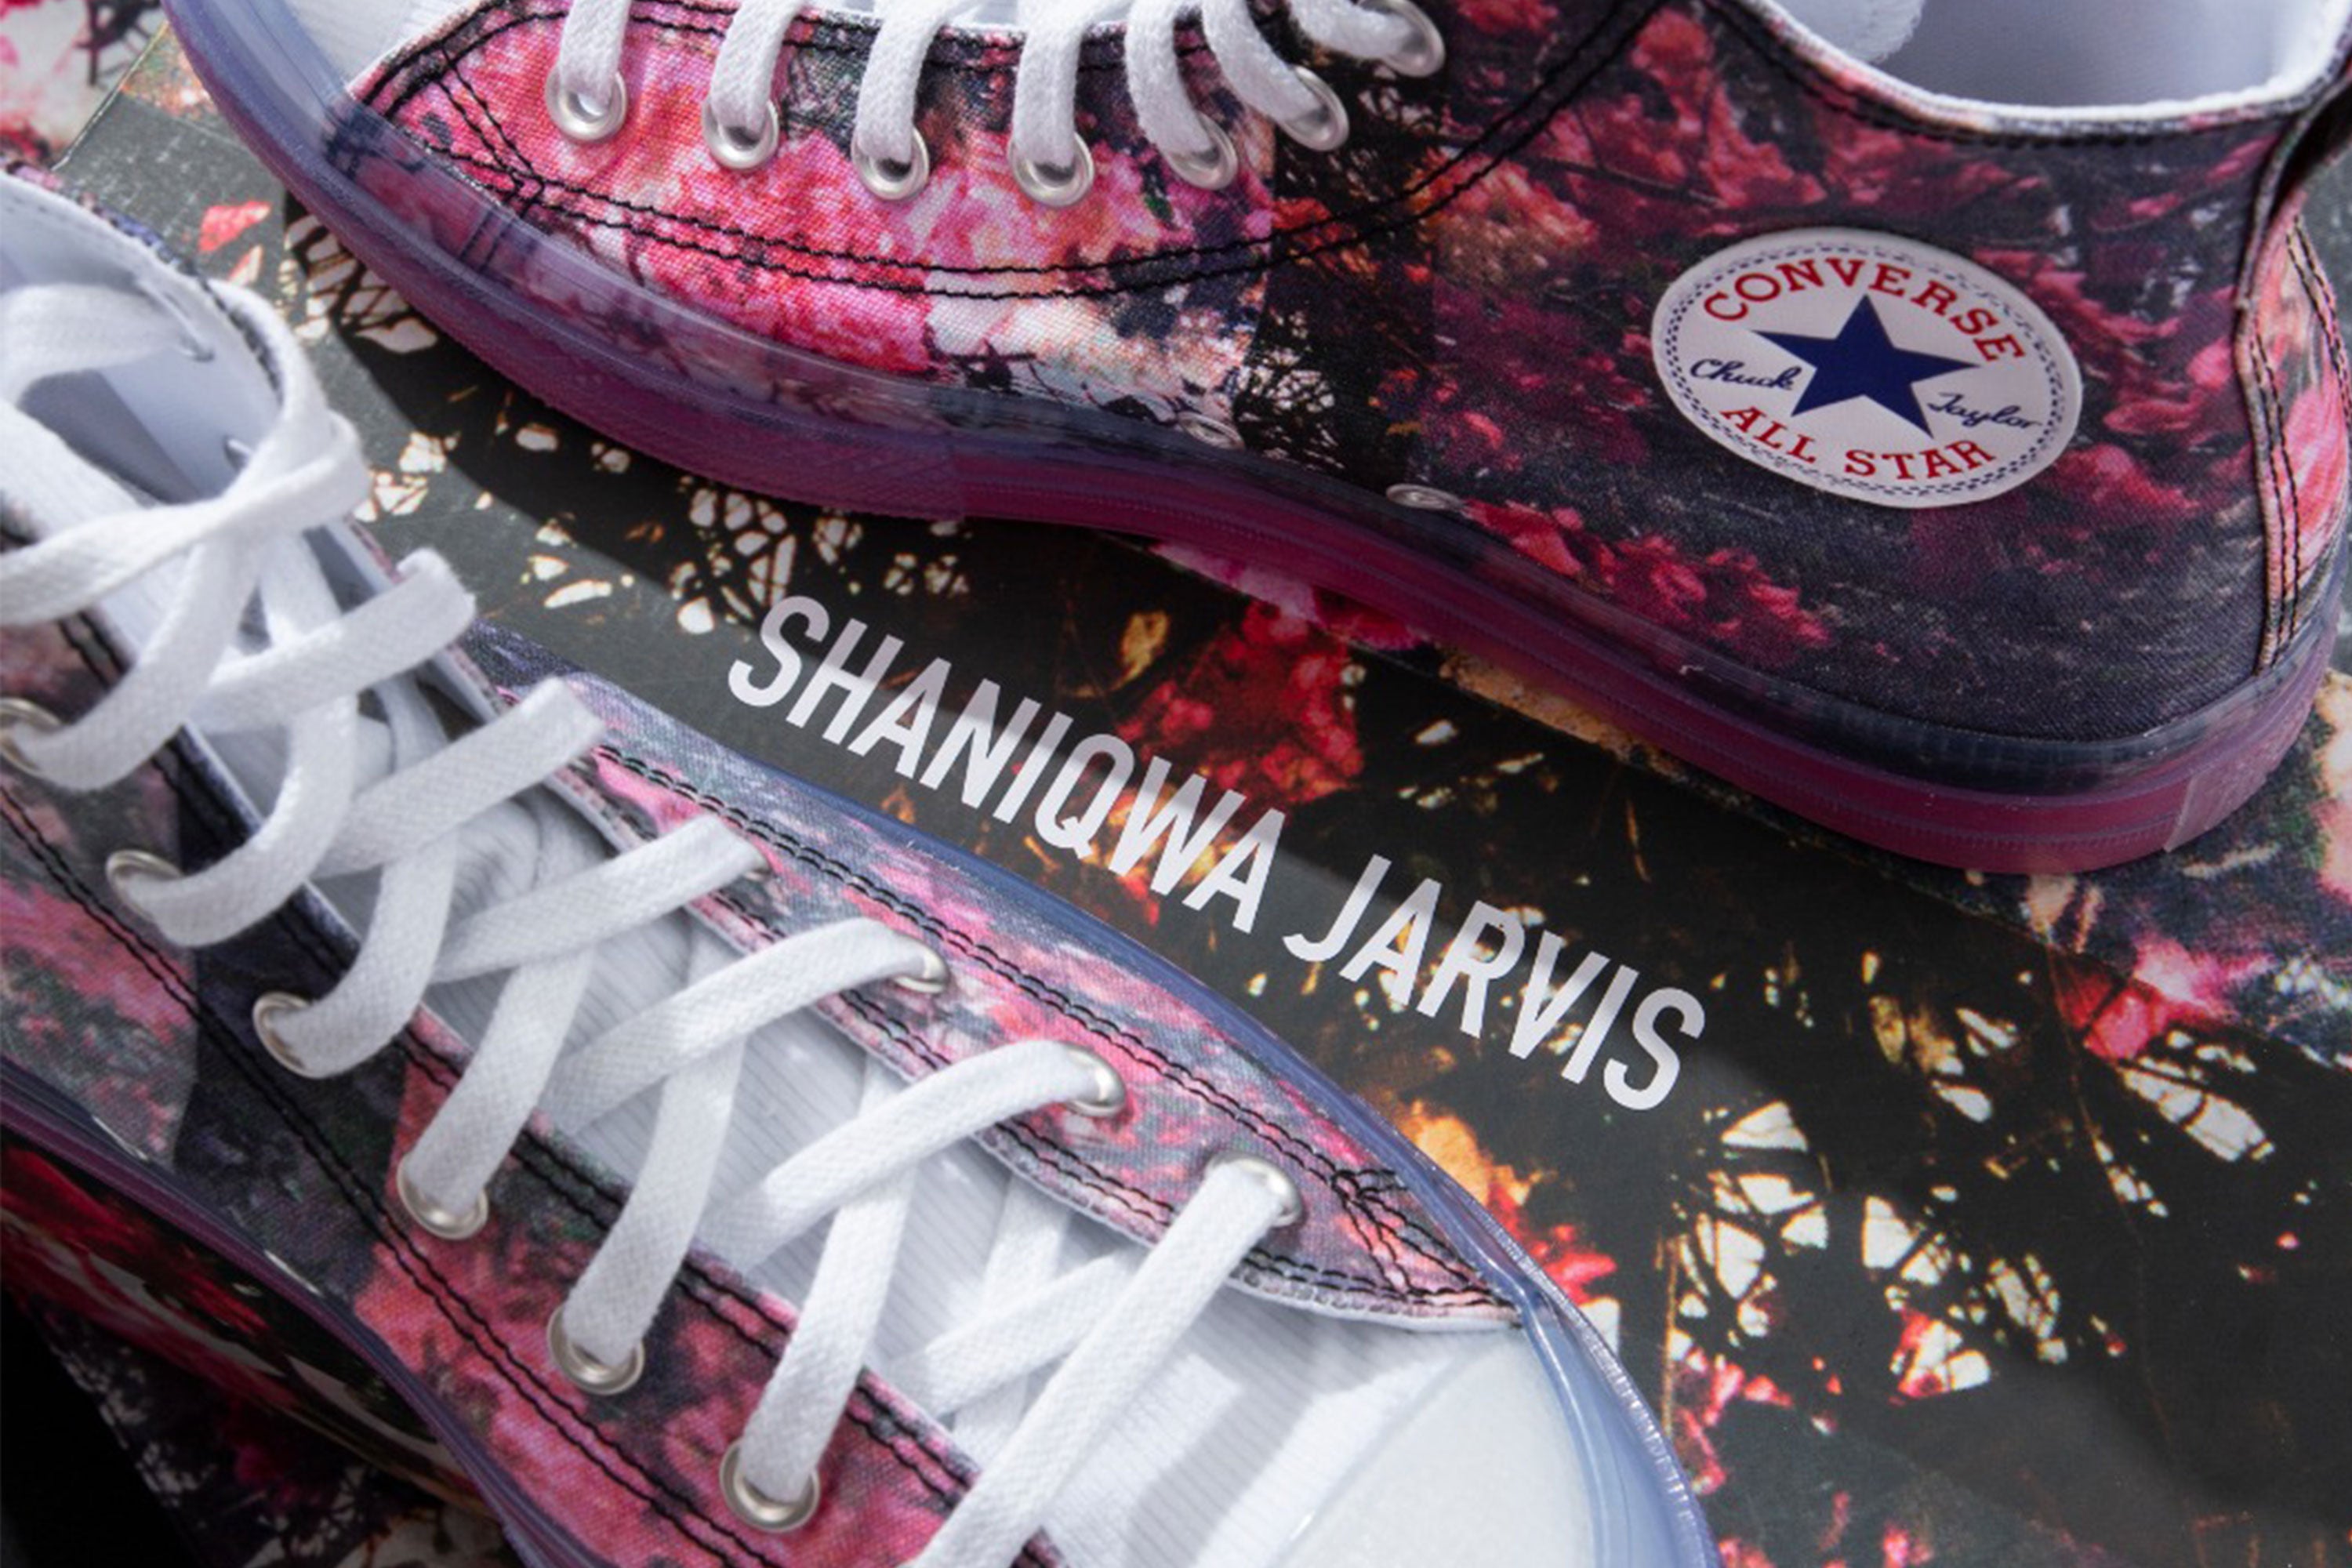 Shaniqwa Jarvis Chuck Taylor CX at JUICE! – JUICESTORE